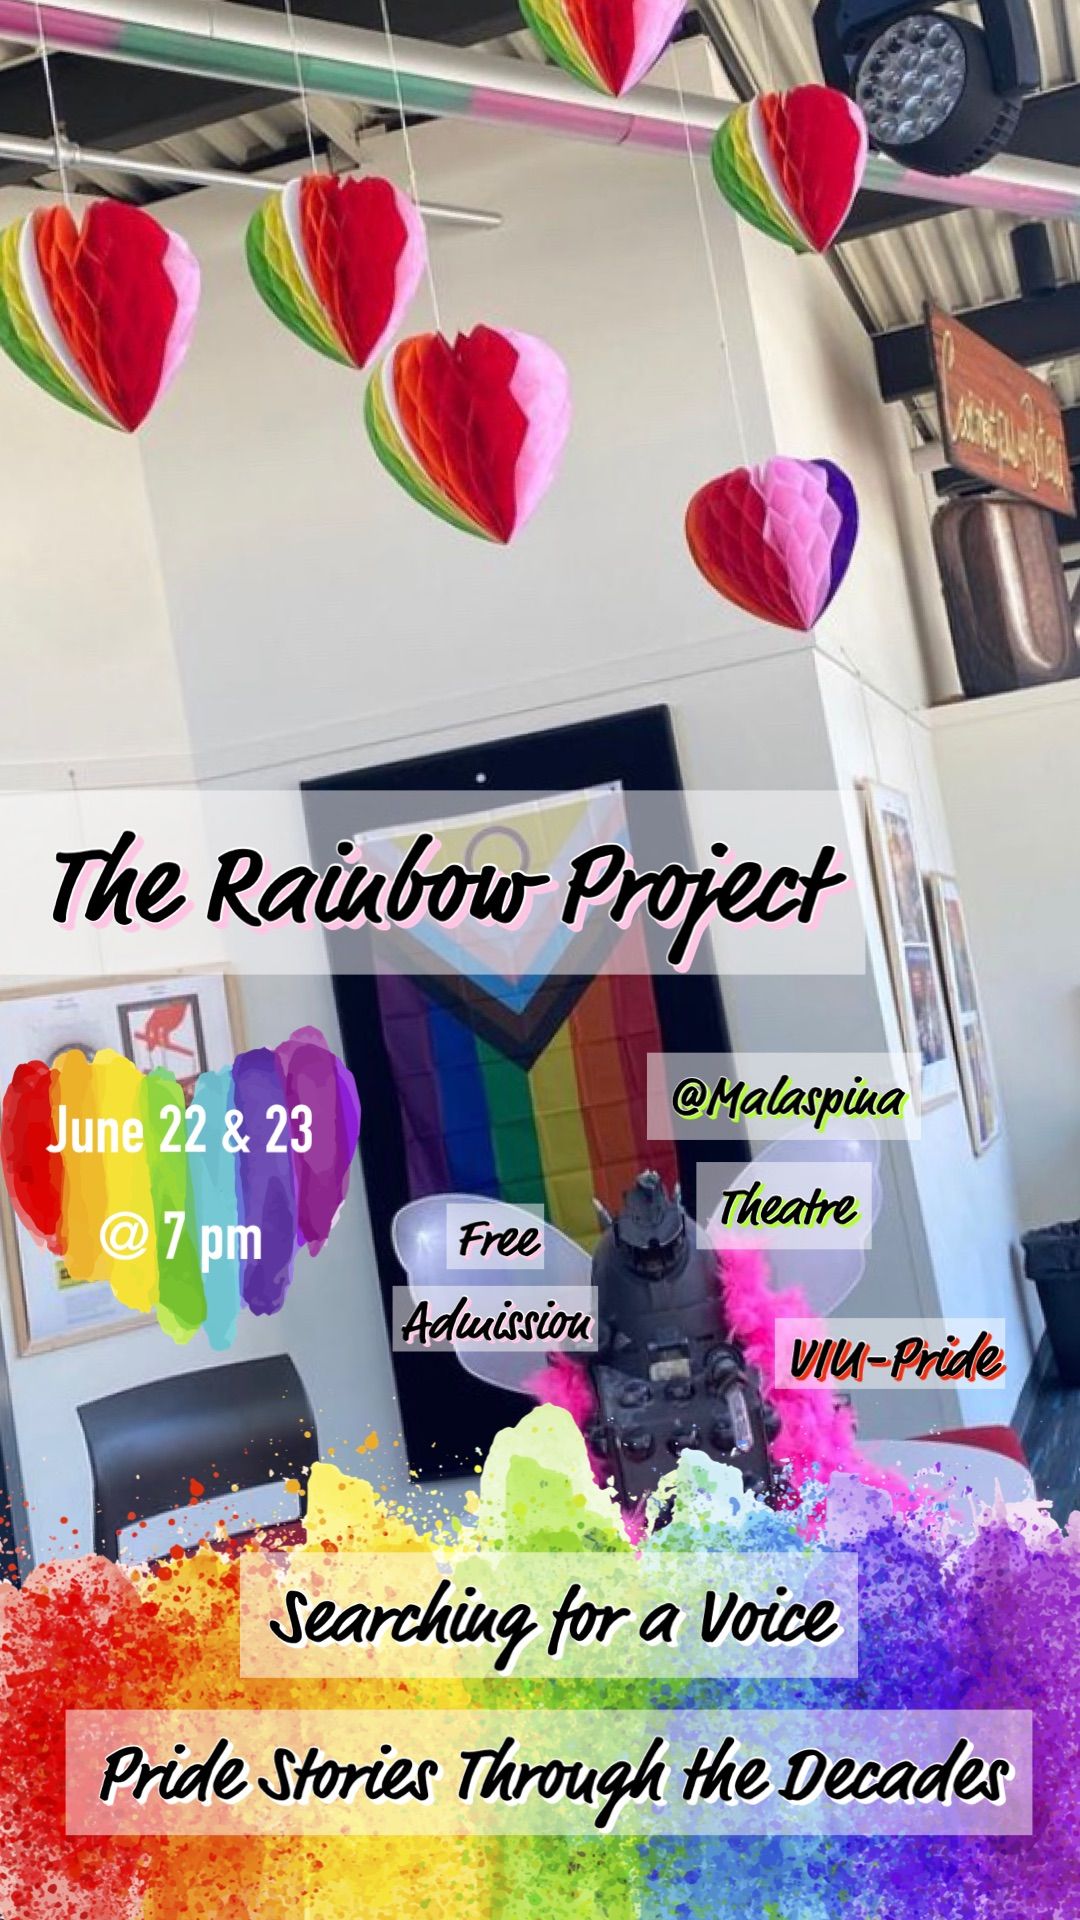 The Rainbow Project: Searching for a Voice , Pride Stories Through the Decades